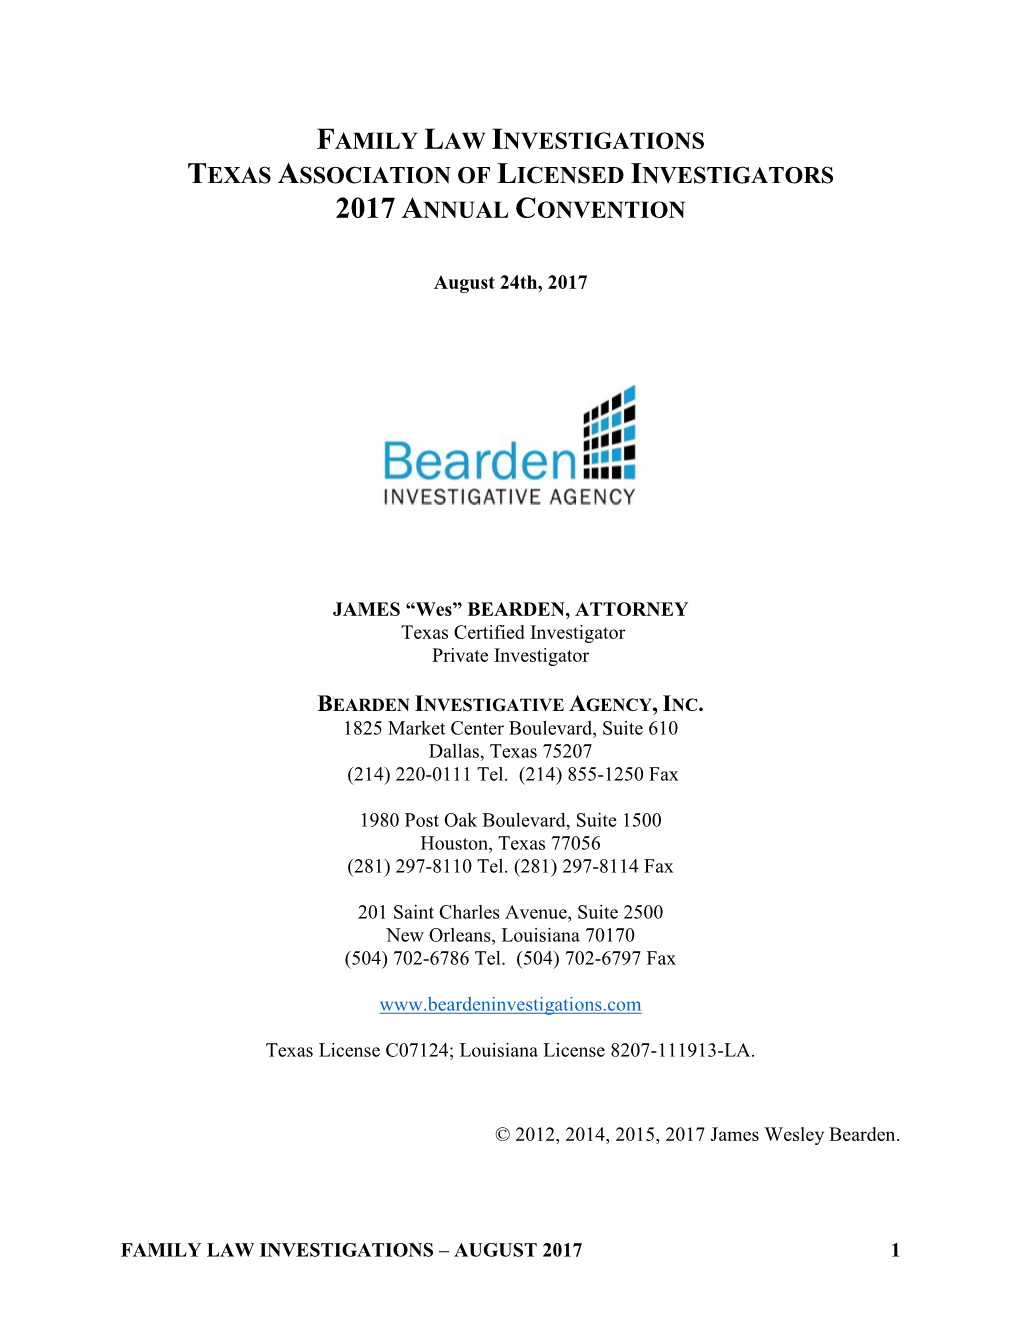 Family Law Investigations Texas Association of Licensed Investigators 2017 Annual Convention